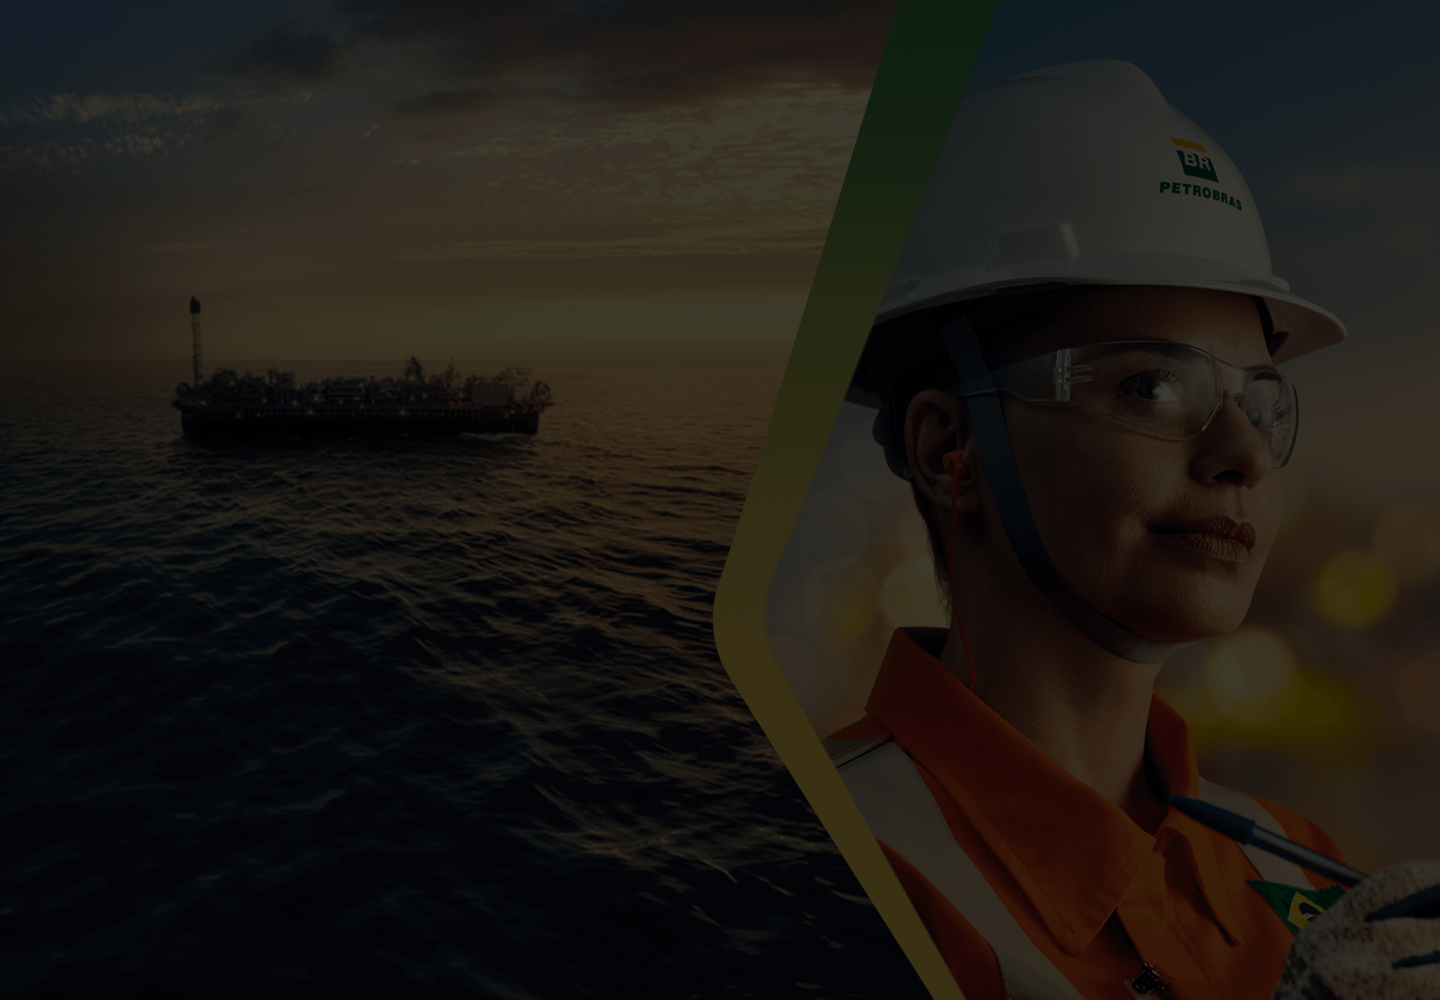 Two different images merged. On the left, an oil platform at sea. On the right, a woman wearing a Petrobras uniform.